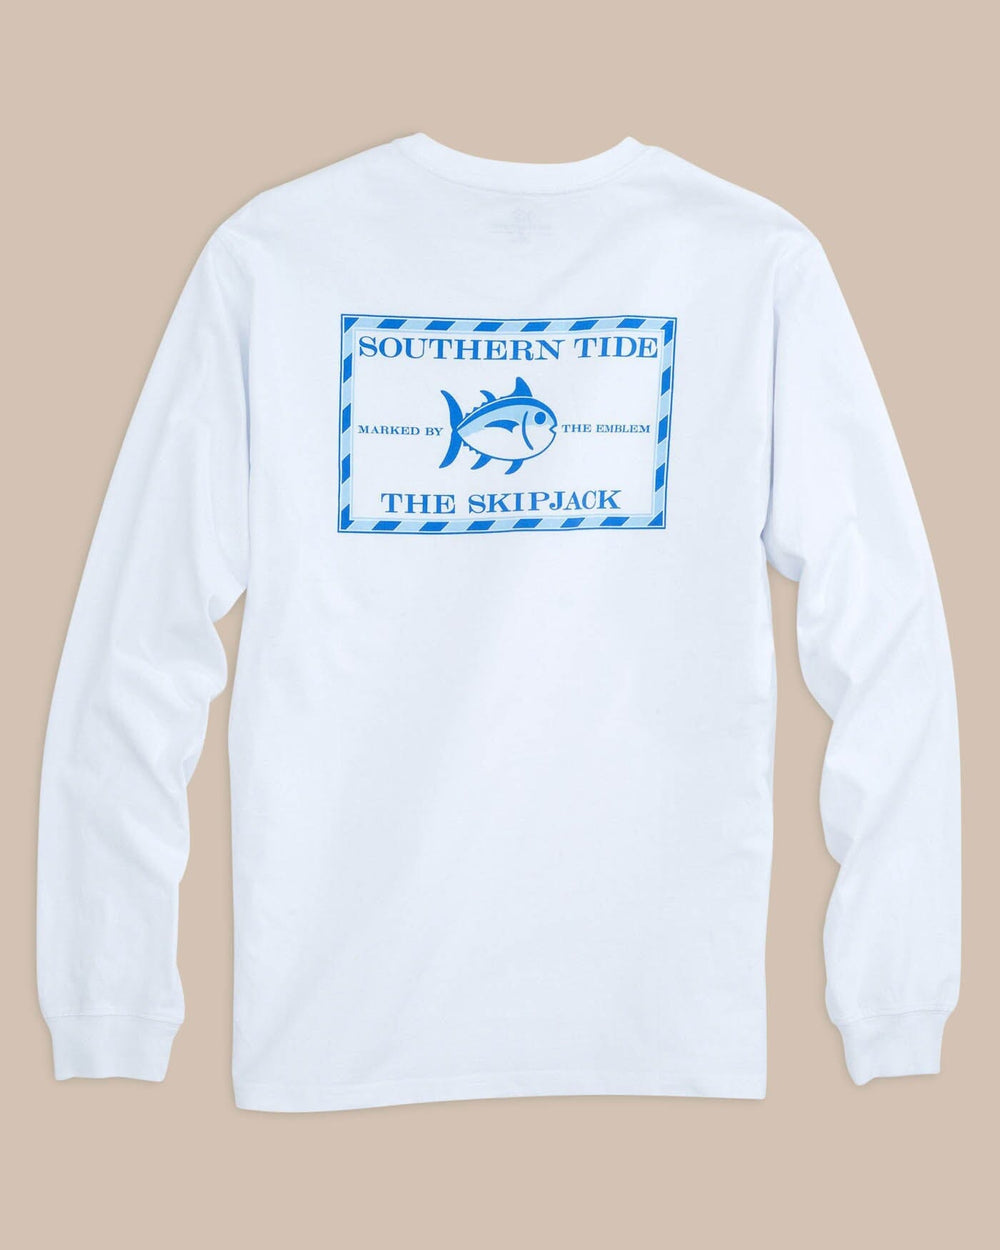 The back view of the Men's White Long Sleeve Original Skipjack T-shirt by Southern Tide - Classic White